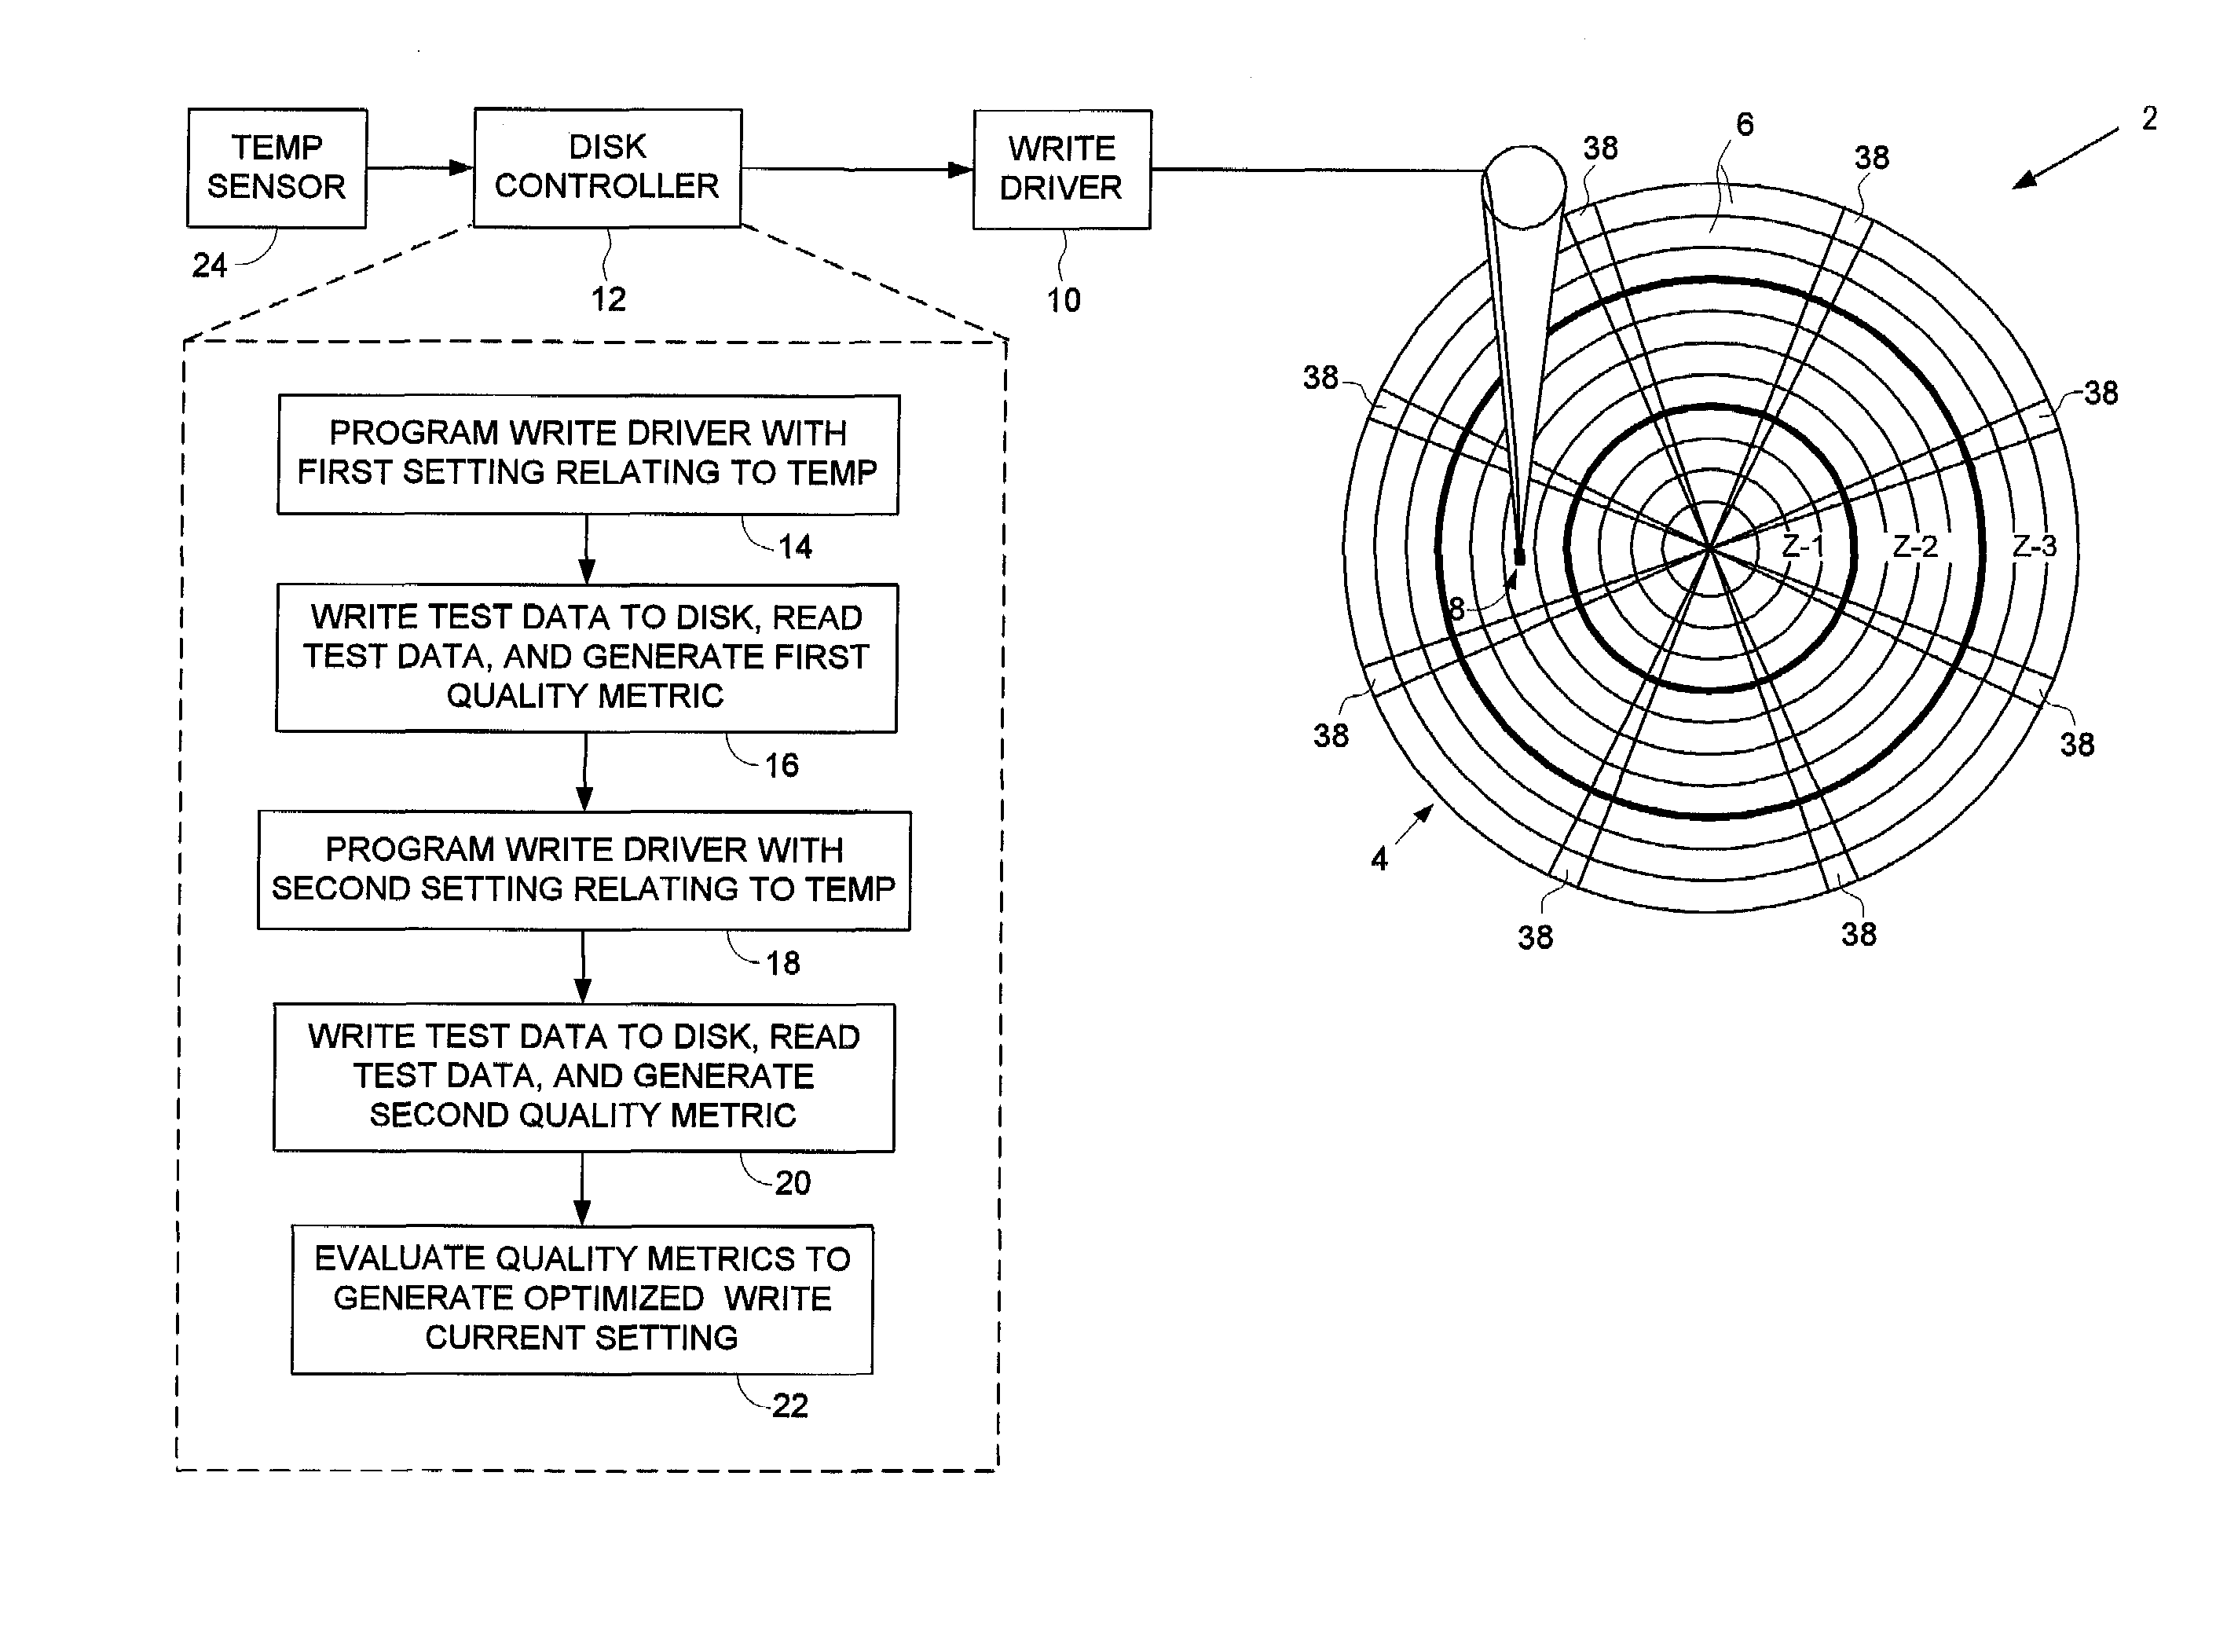 Disk drive for optimizing write current settings relative to drive operating characteristics and ambient temperature readings